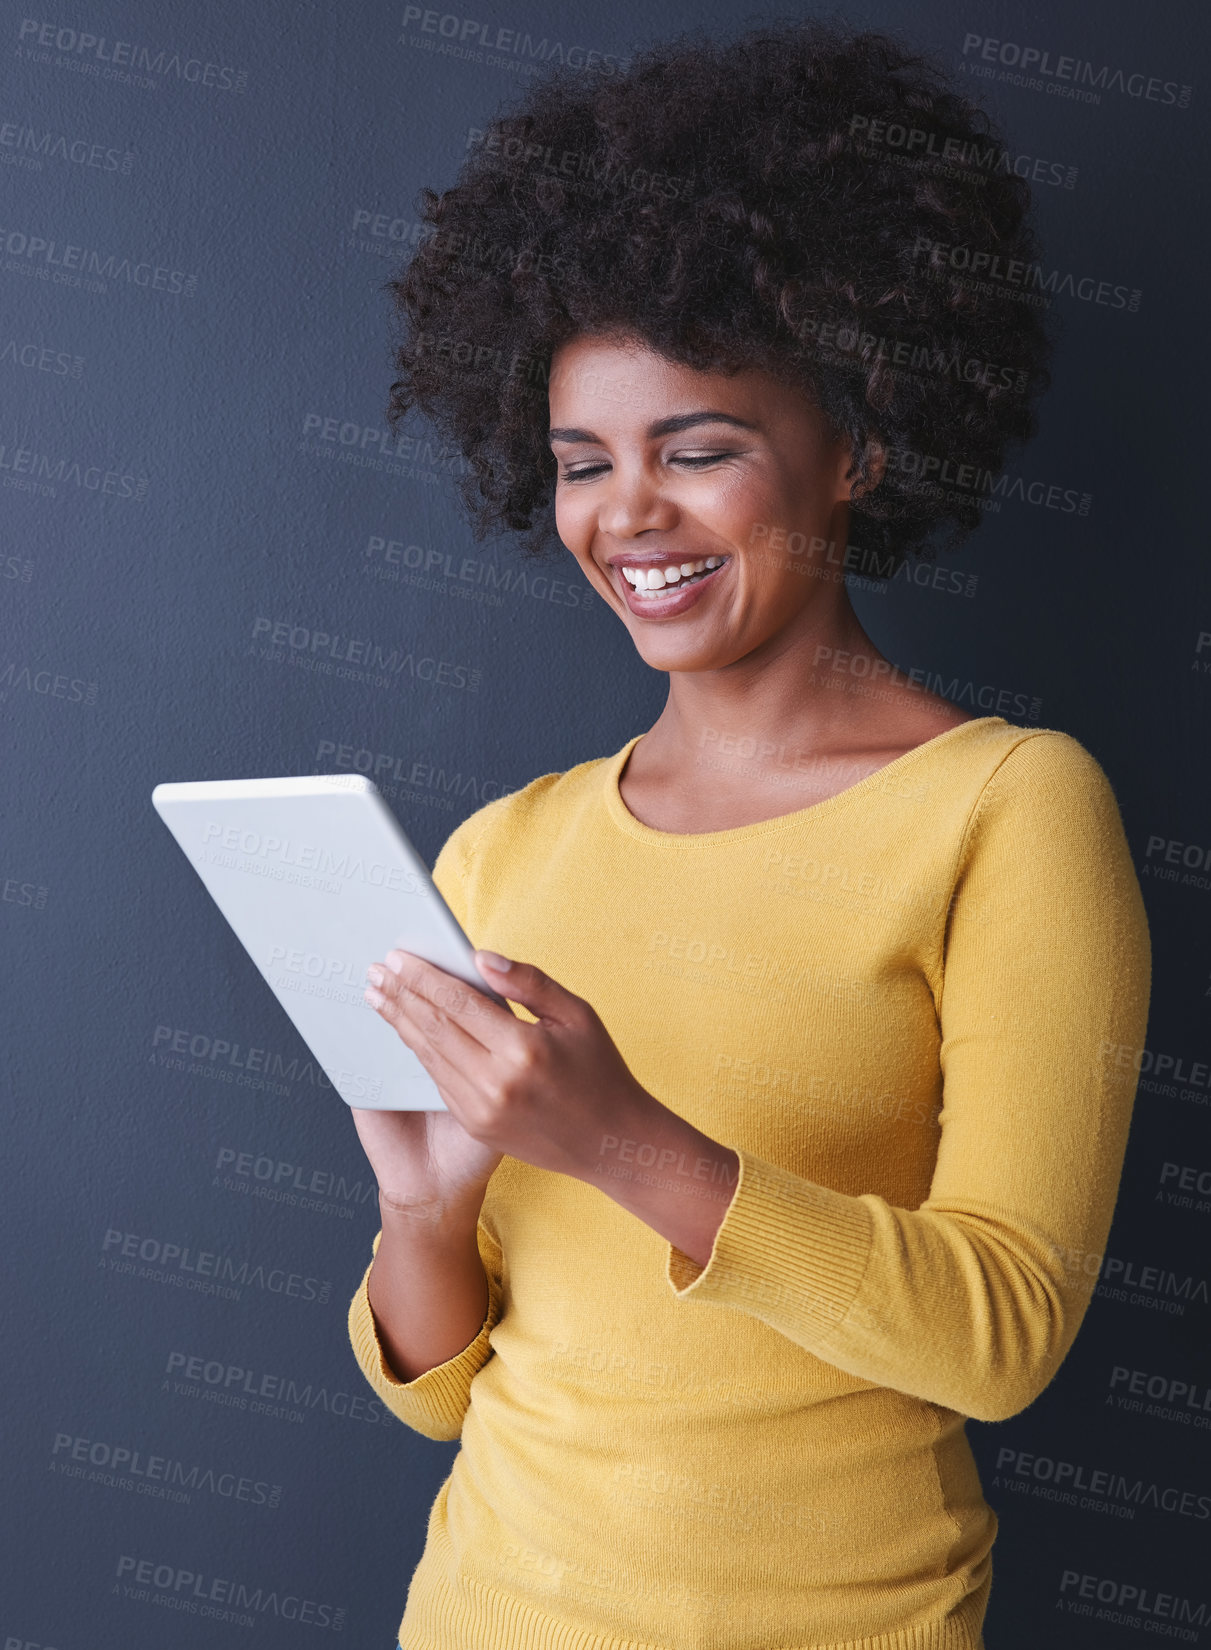 Buy stock photo Studio shot of a young woman using her tablet against a grey background